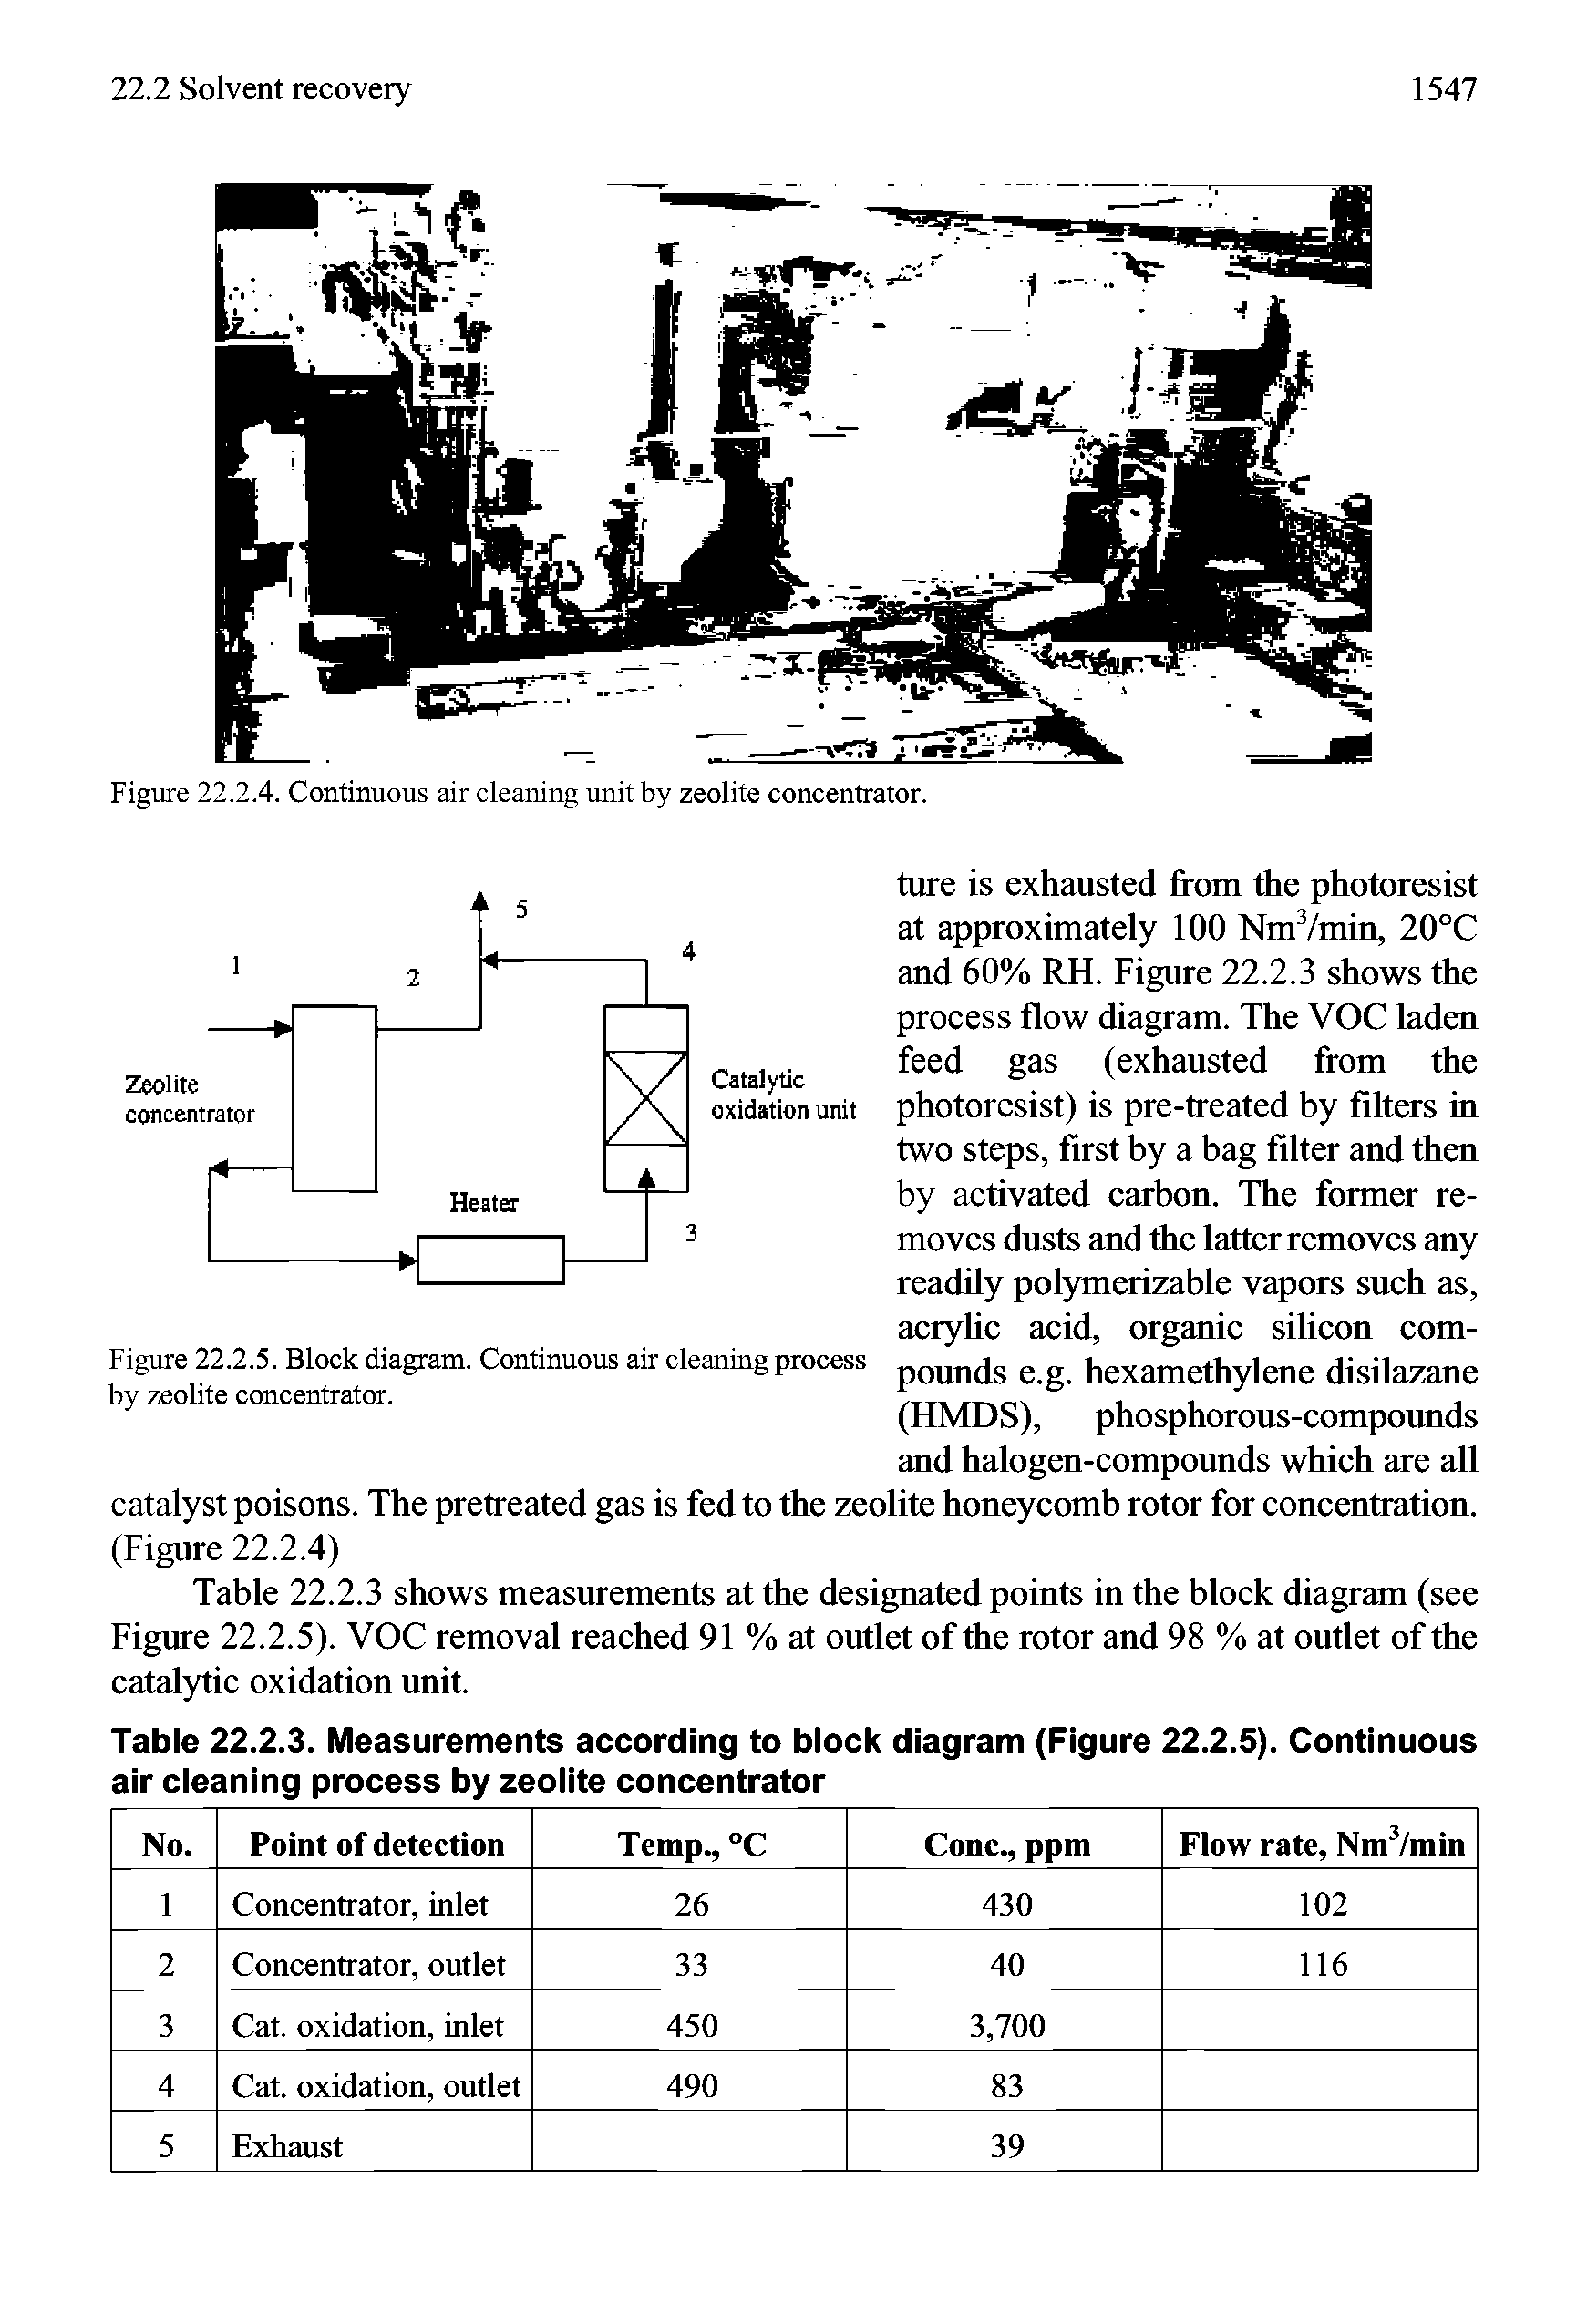 Figure 22.2.4. Continuous air cleaning unit by zeolite concentrator.